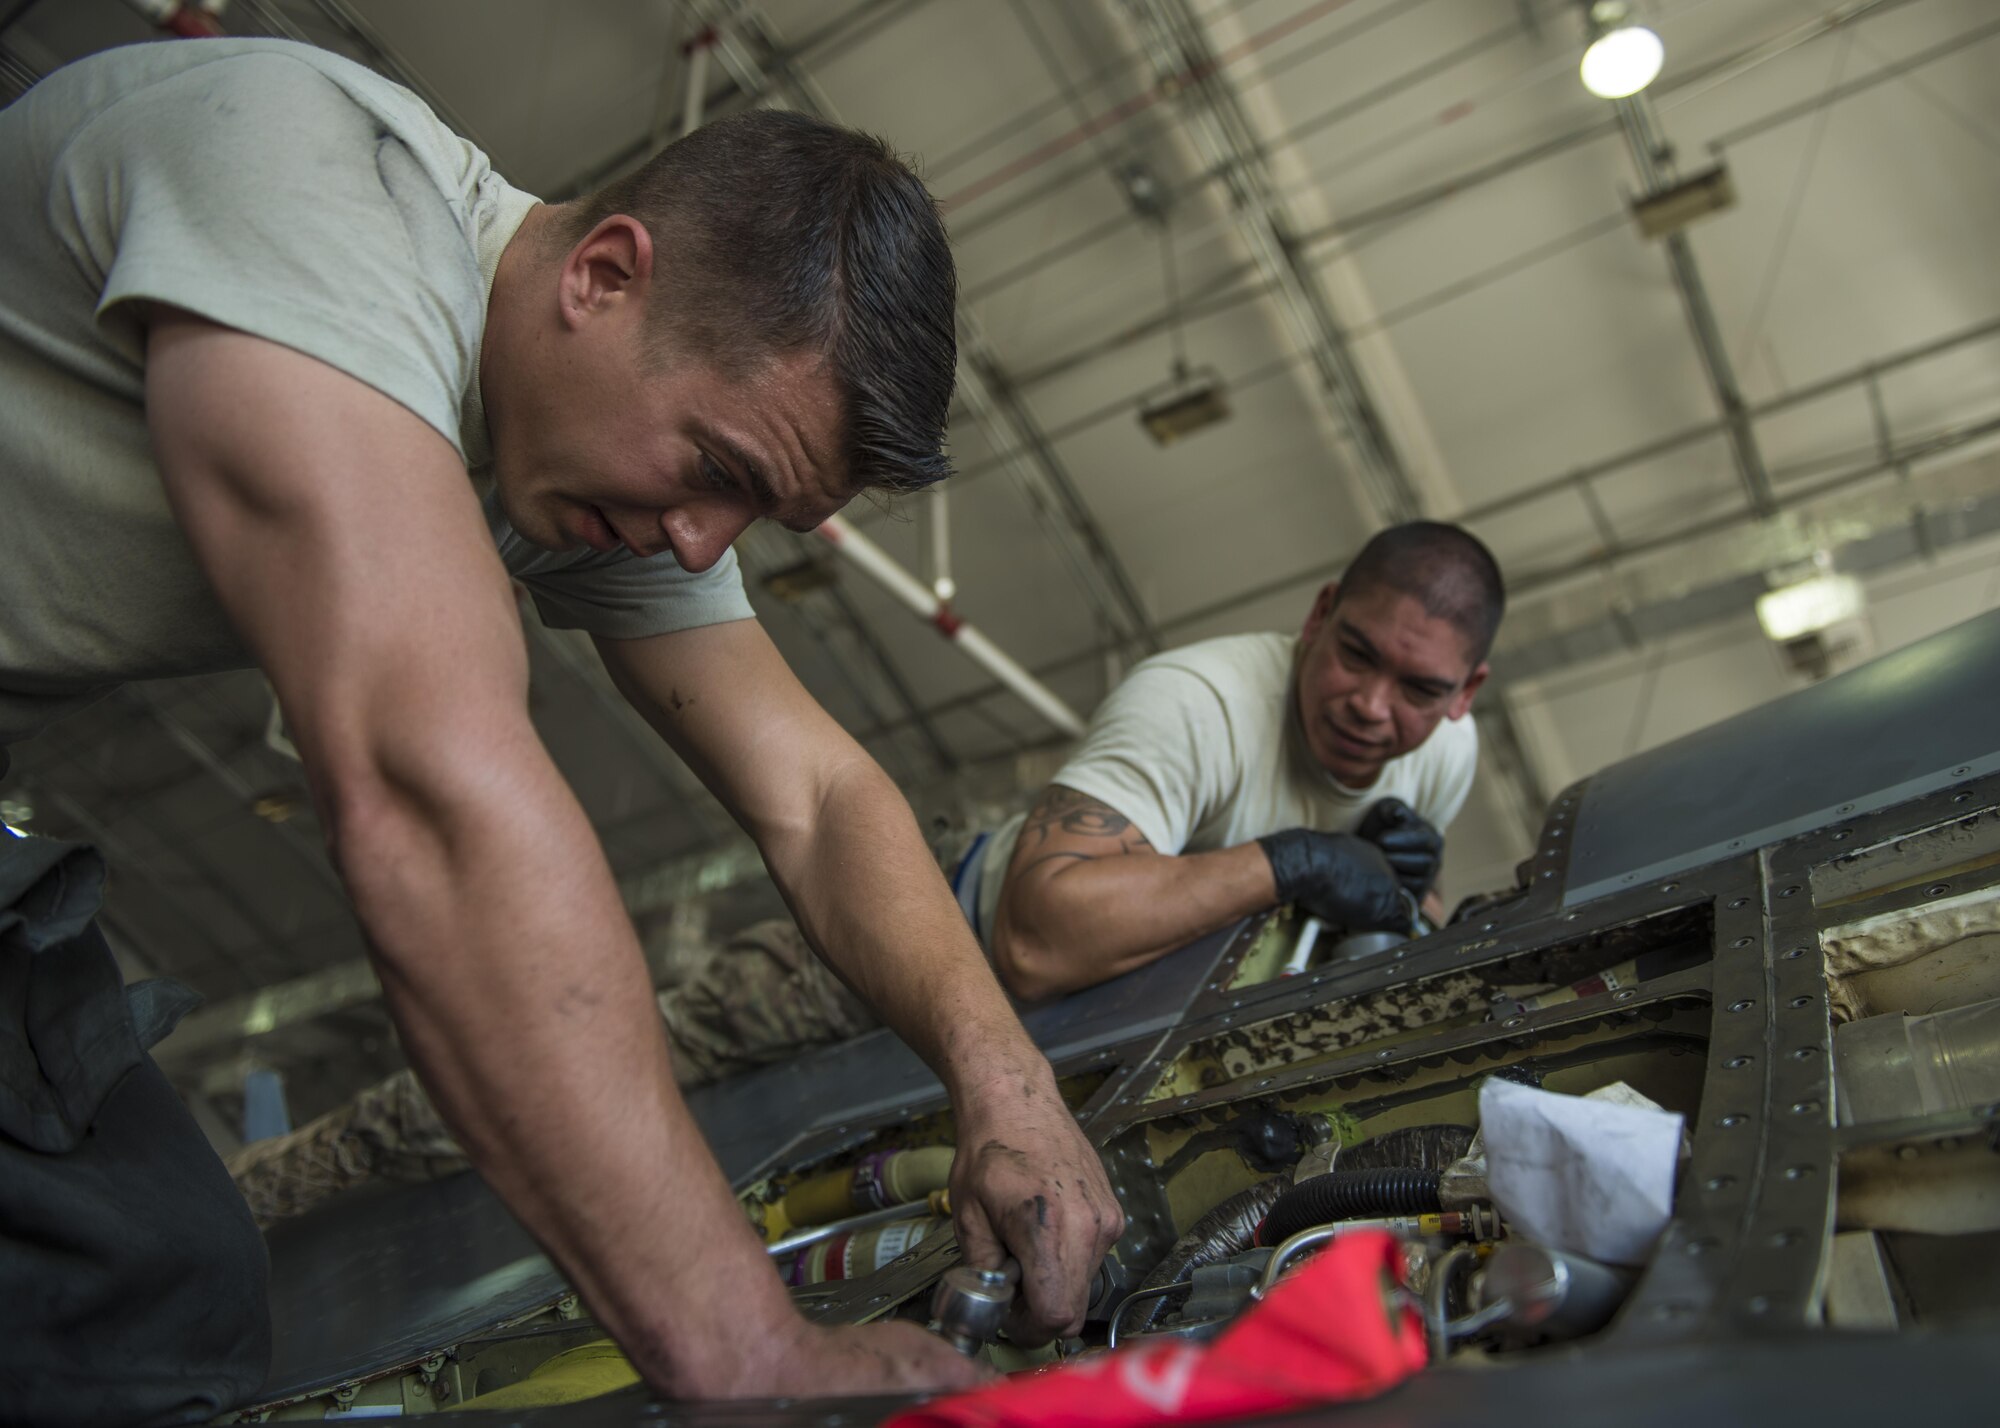 Senior Airman Michael Nemec, 455th Expeditionary Maintenance Squadron crew chief, installs an angle gear box on an F-16C Fighting Falcon, Bagram Airfield, Afghanistan, Aug. 22, 2016. The gear box transfers power to the leading edge flap torque shaft to help the aircraft achieve lift during takeoff. (U.S. Air Force photo by Senior Airman Justyn M. Freeman)